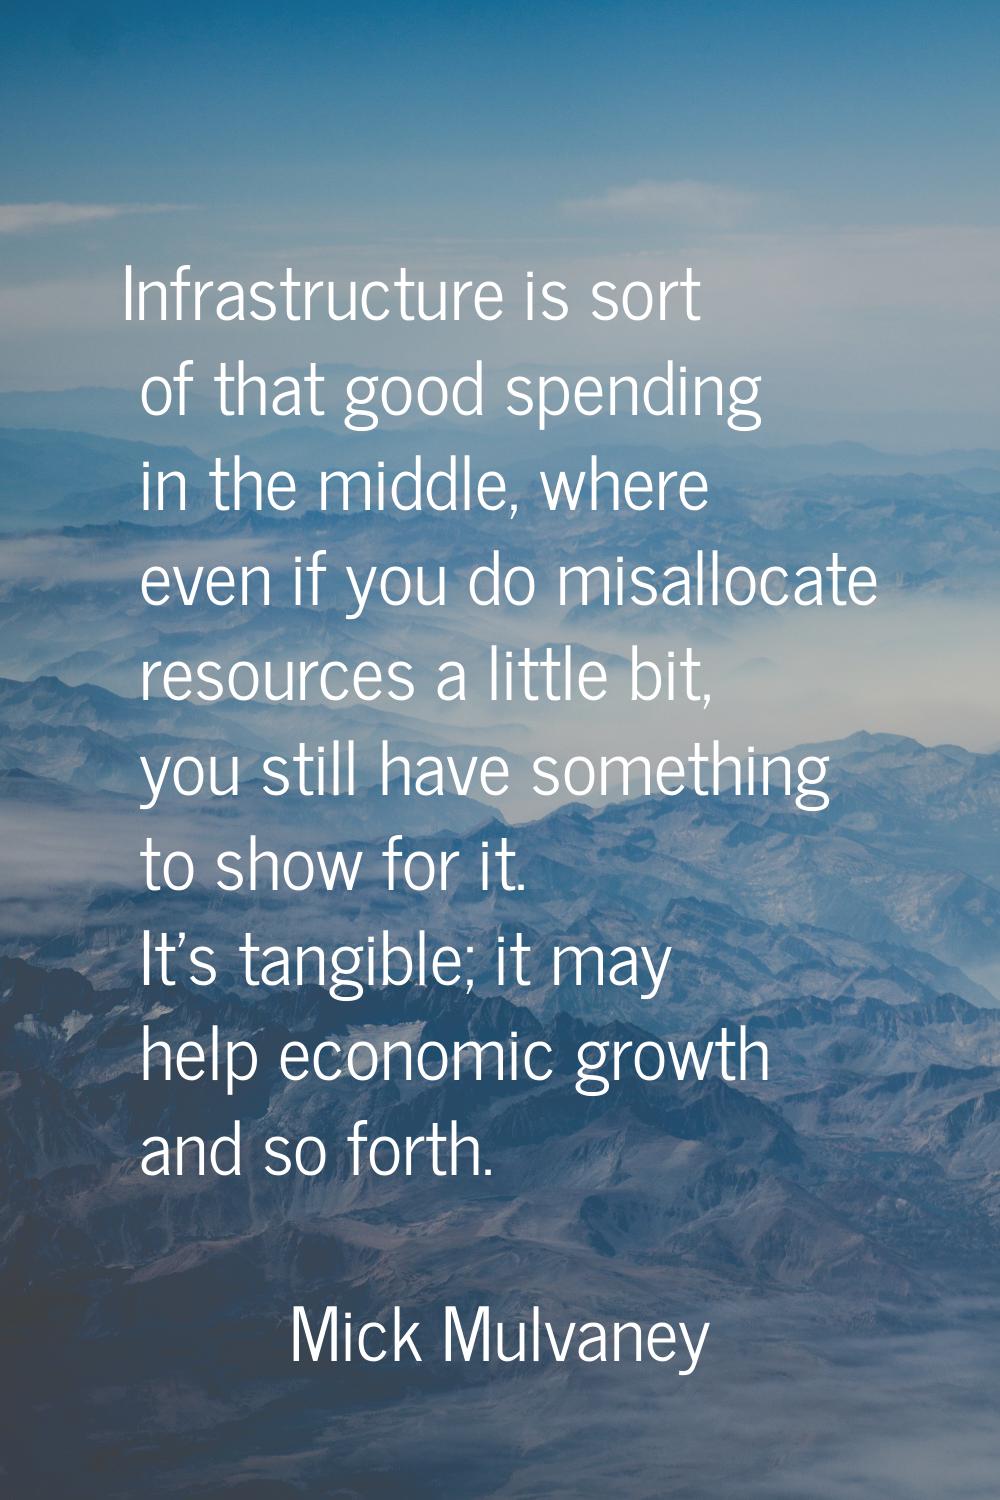 Infrastructure is sort of that good spending in the middle, where even if you do misallocate resour